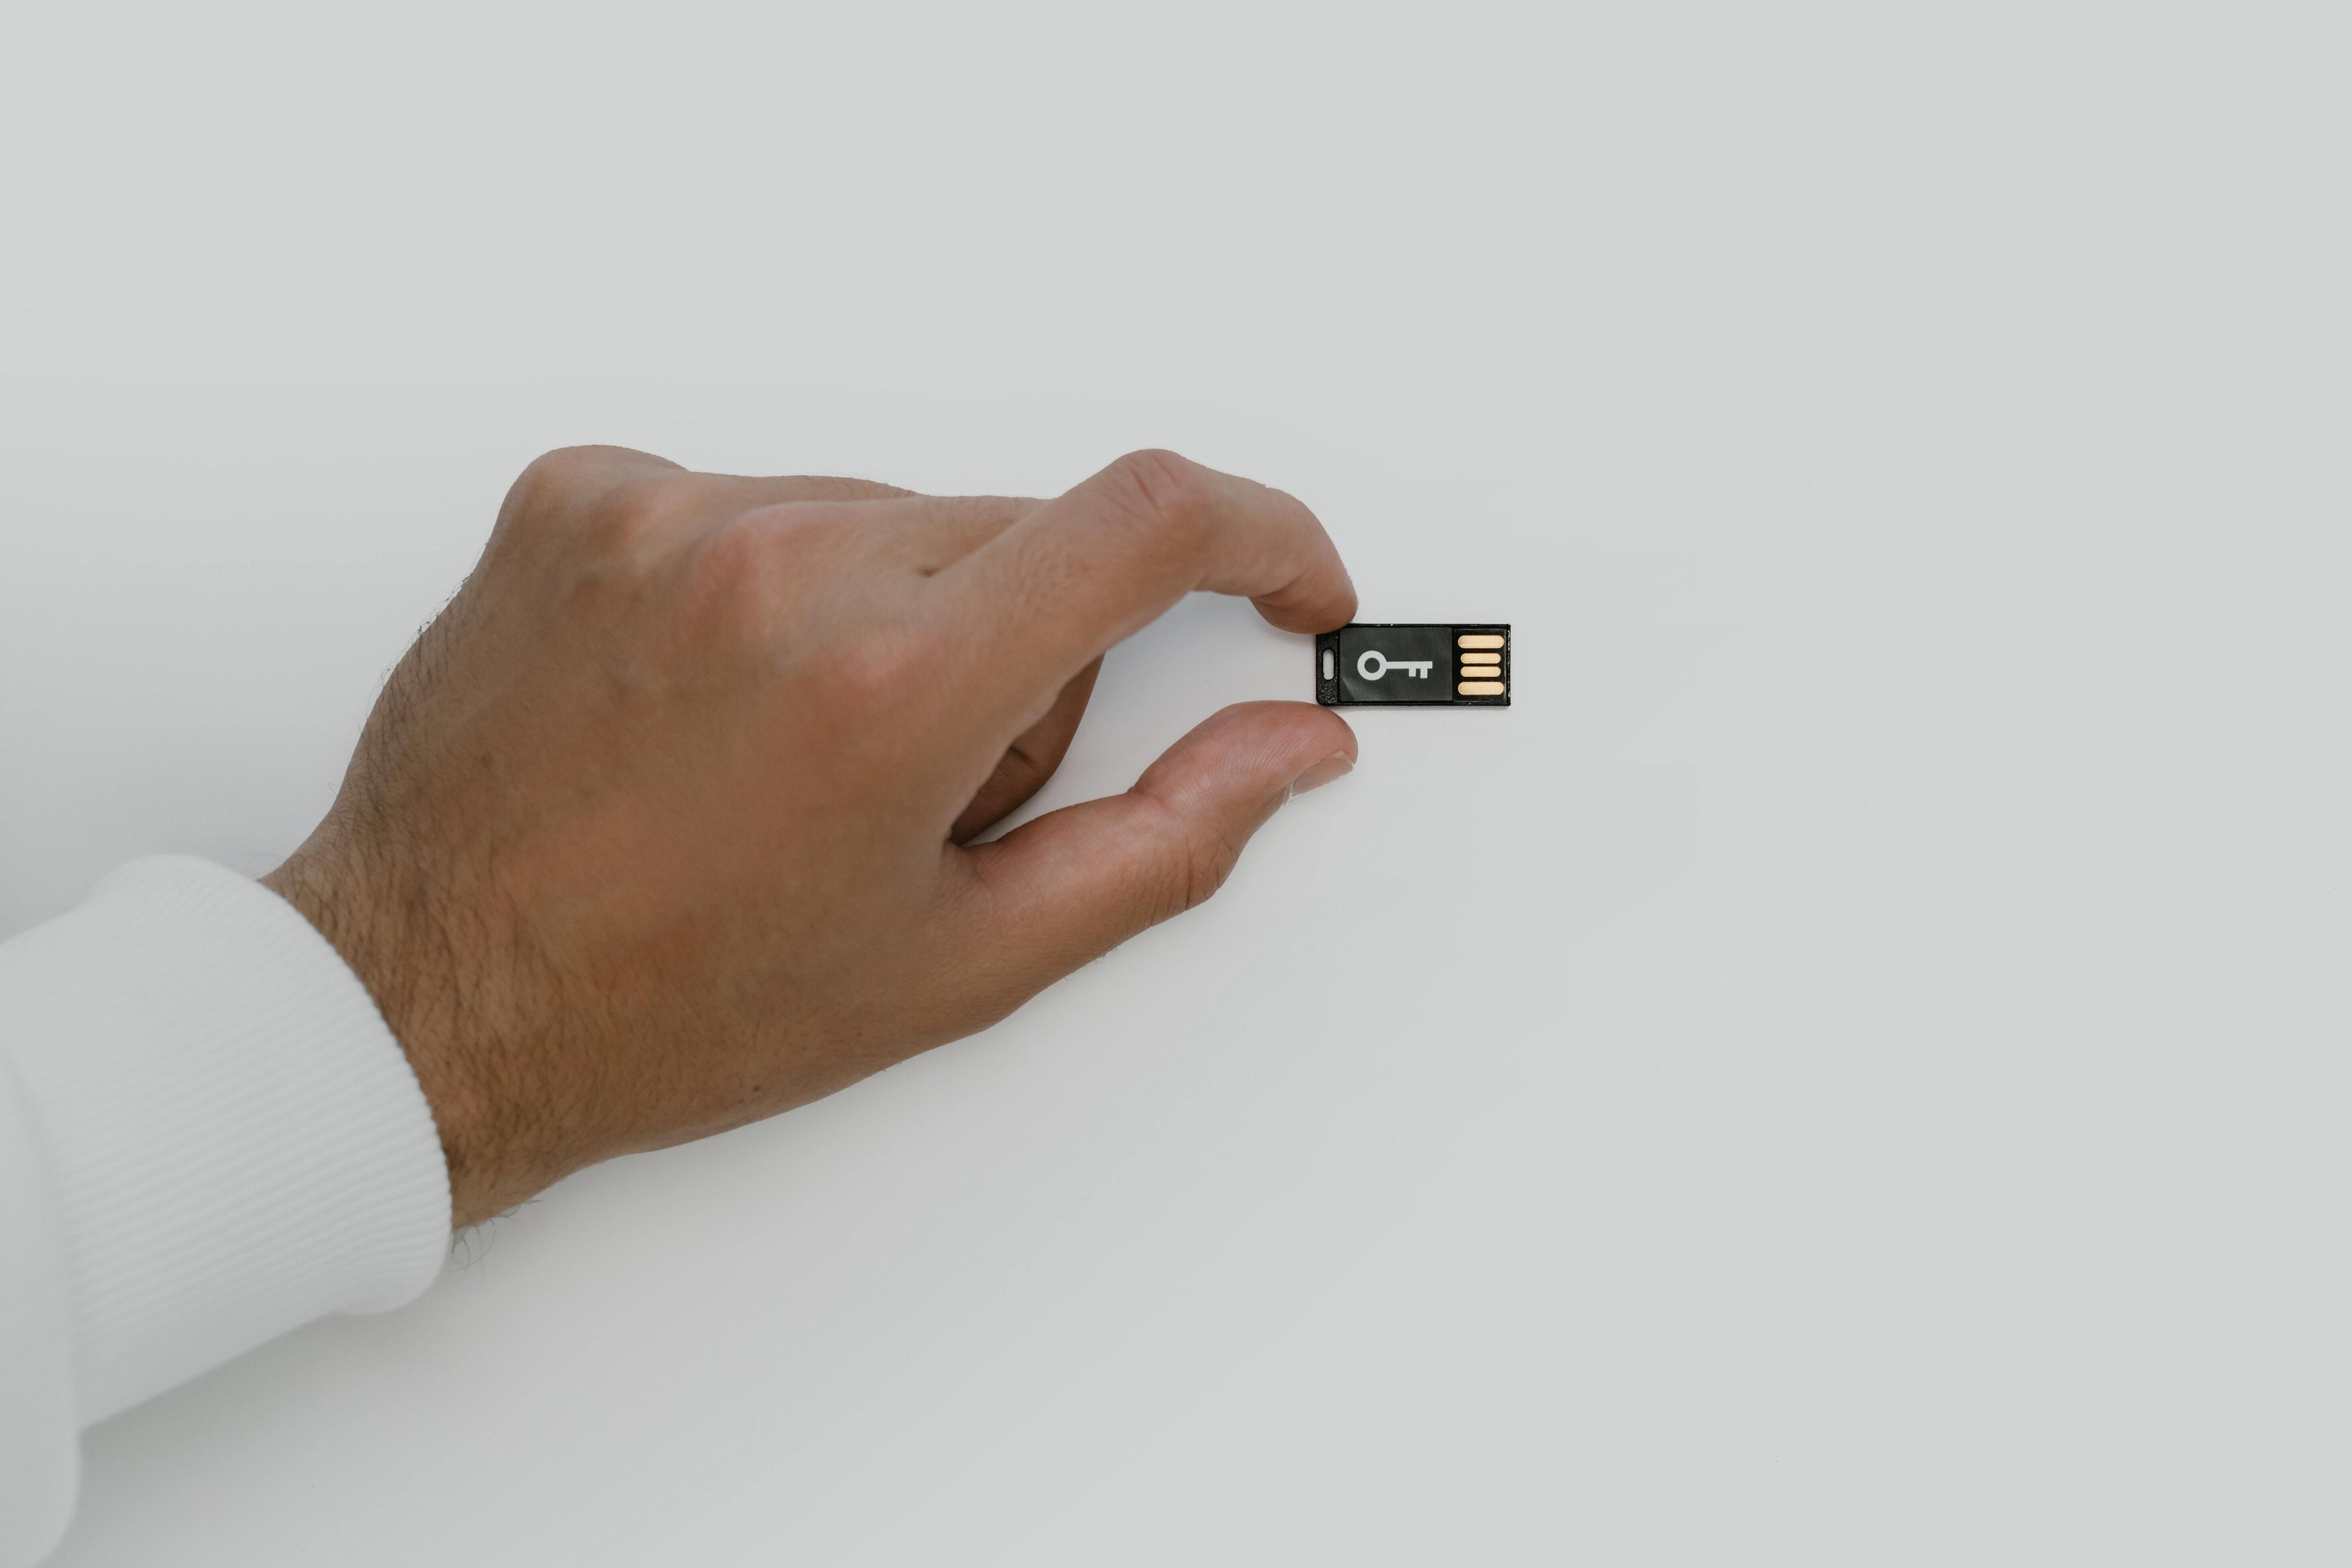 Image of a hand holding a USB device